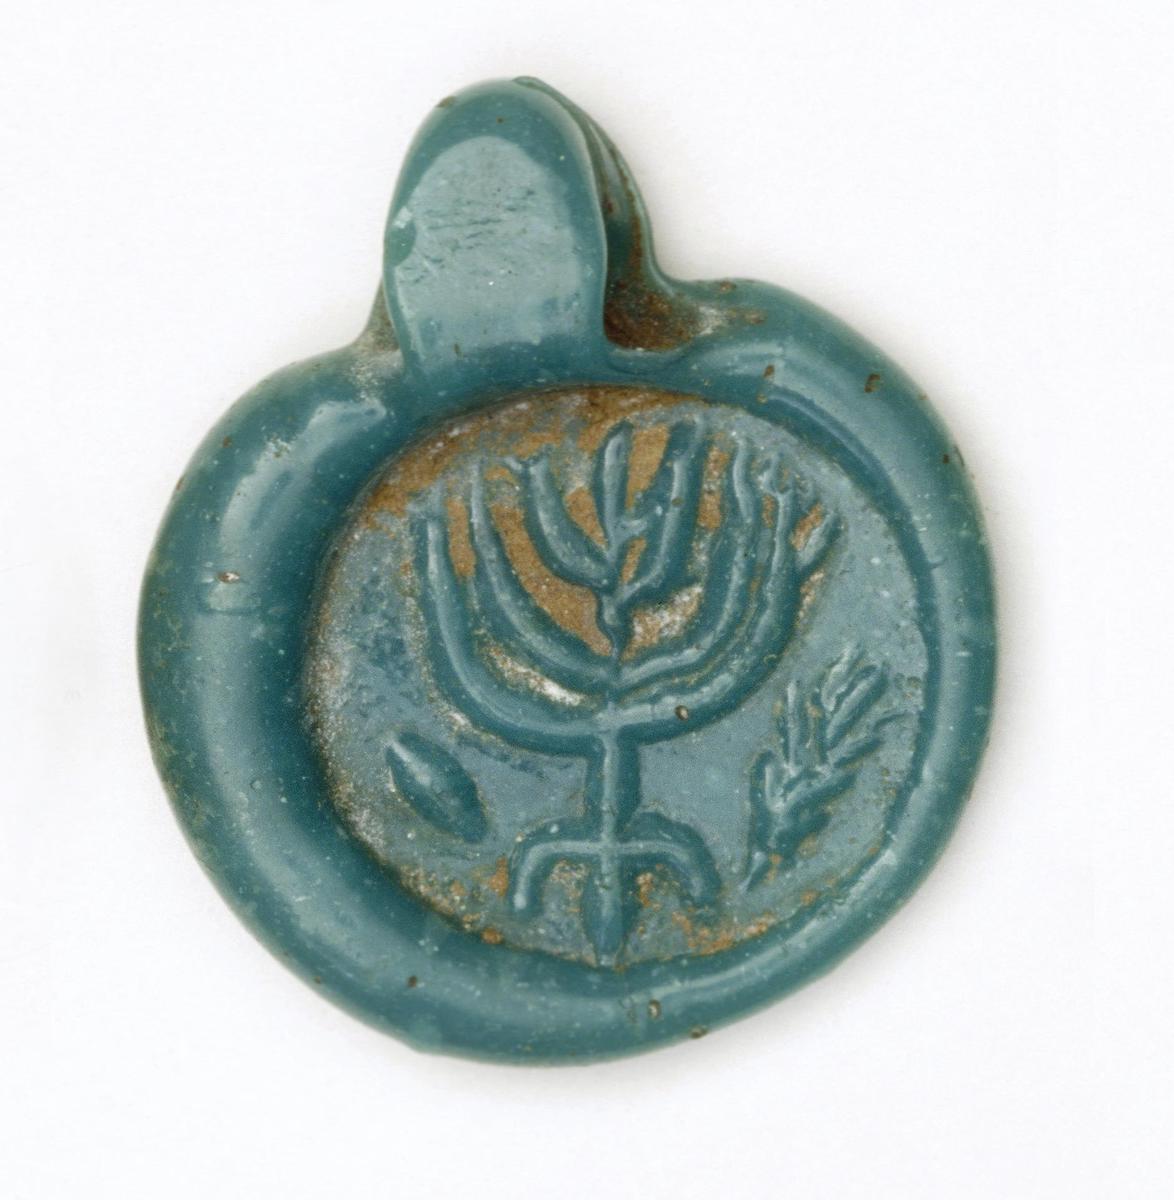 Round blue glass pendant decorated with a seven-branched candelabra (menorah) flanked by a citron fruit (etrog) and a palm frond (lulav). Suspension loop at top.